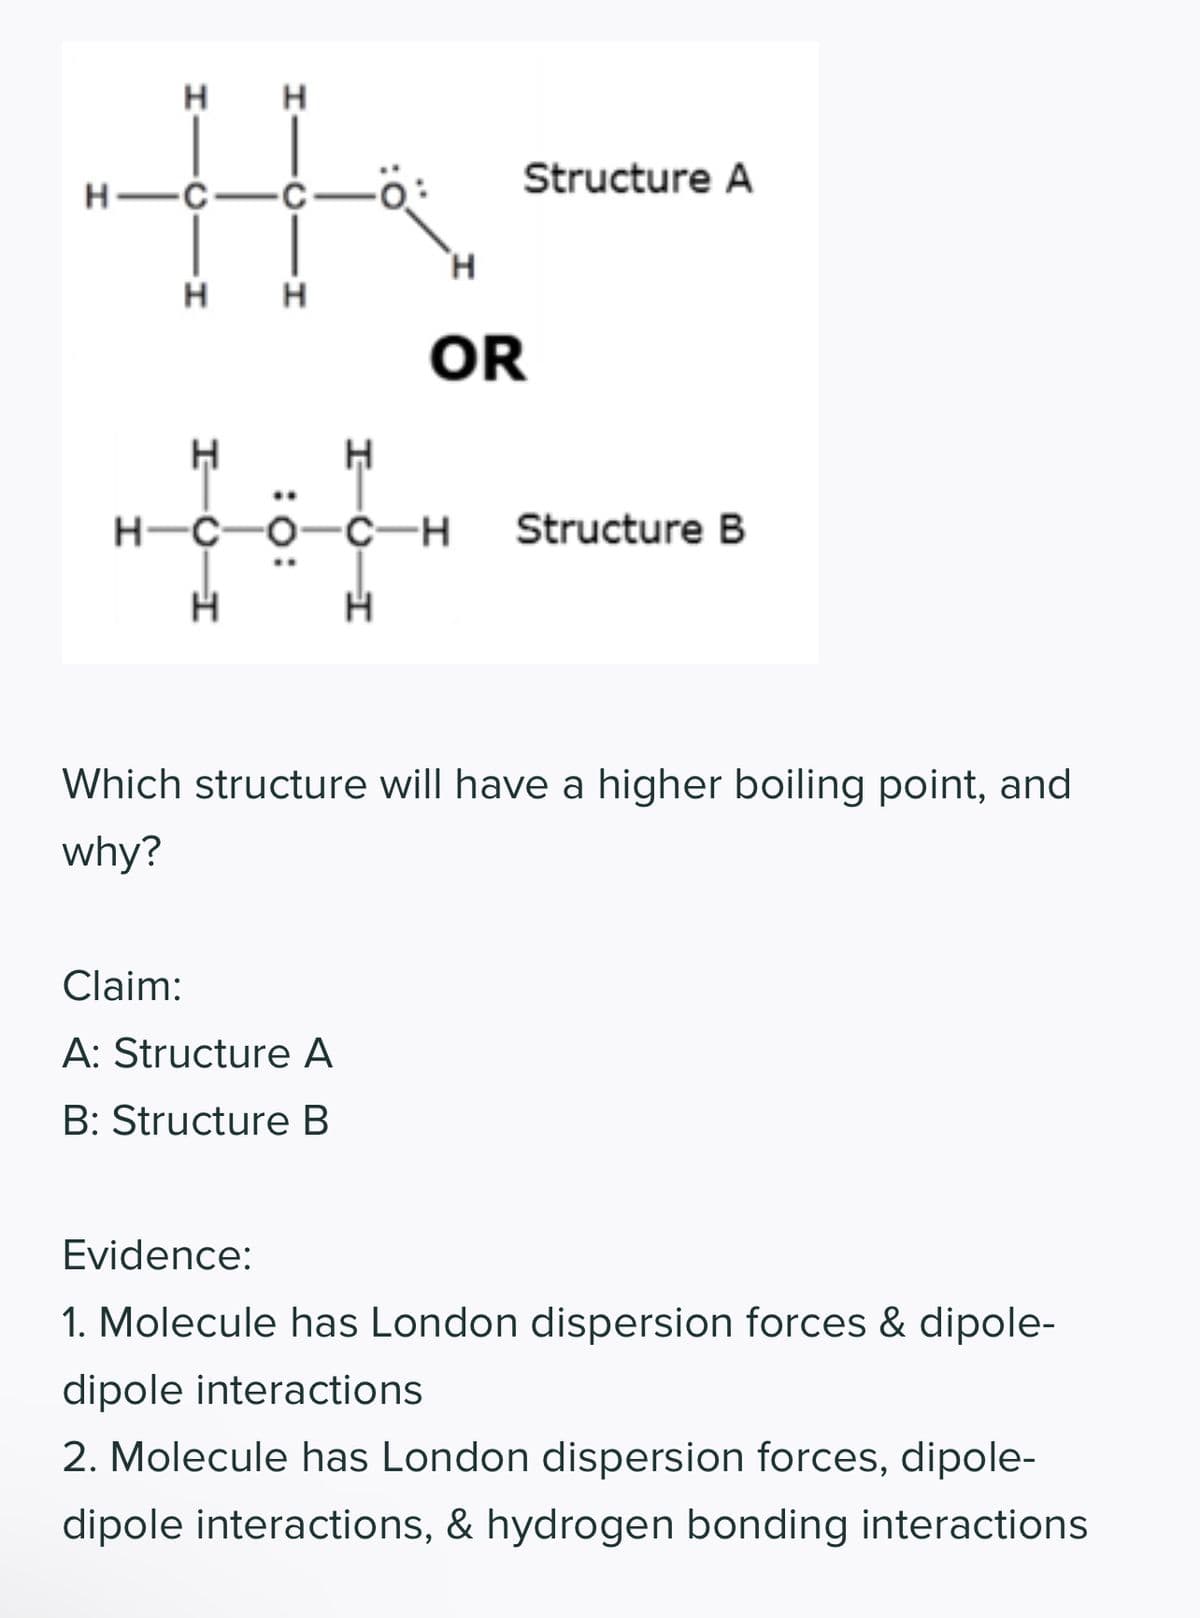 H
H
the
-C
H
H
HIC
H
HQ-H
Н
Н
HC-H
Н
Claim:
A: Structure A
B: Structure B
HỌCÔ CH
H
Н
Structure A
OR
Structure B
Which structure will have a higher boiling point, and
why?
Evidence:
1. Molecule has London dispersion forces & dipole-
dipole interactions
2. Molecule has London dispersion forces, dipole-
dipole interactions, & hydrogen bonding interactions